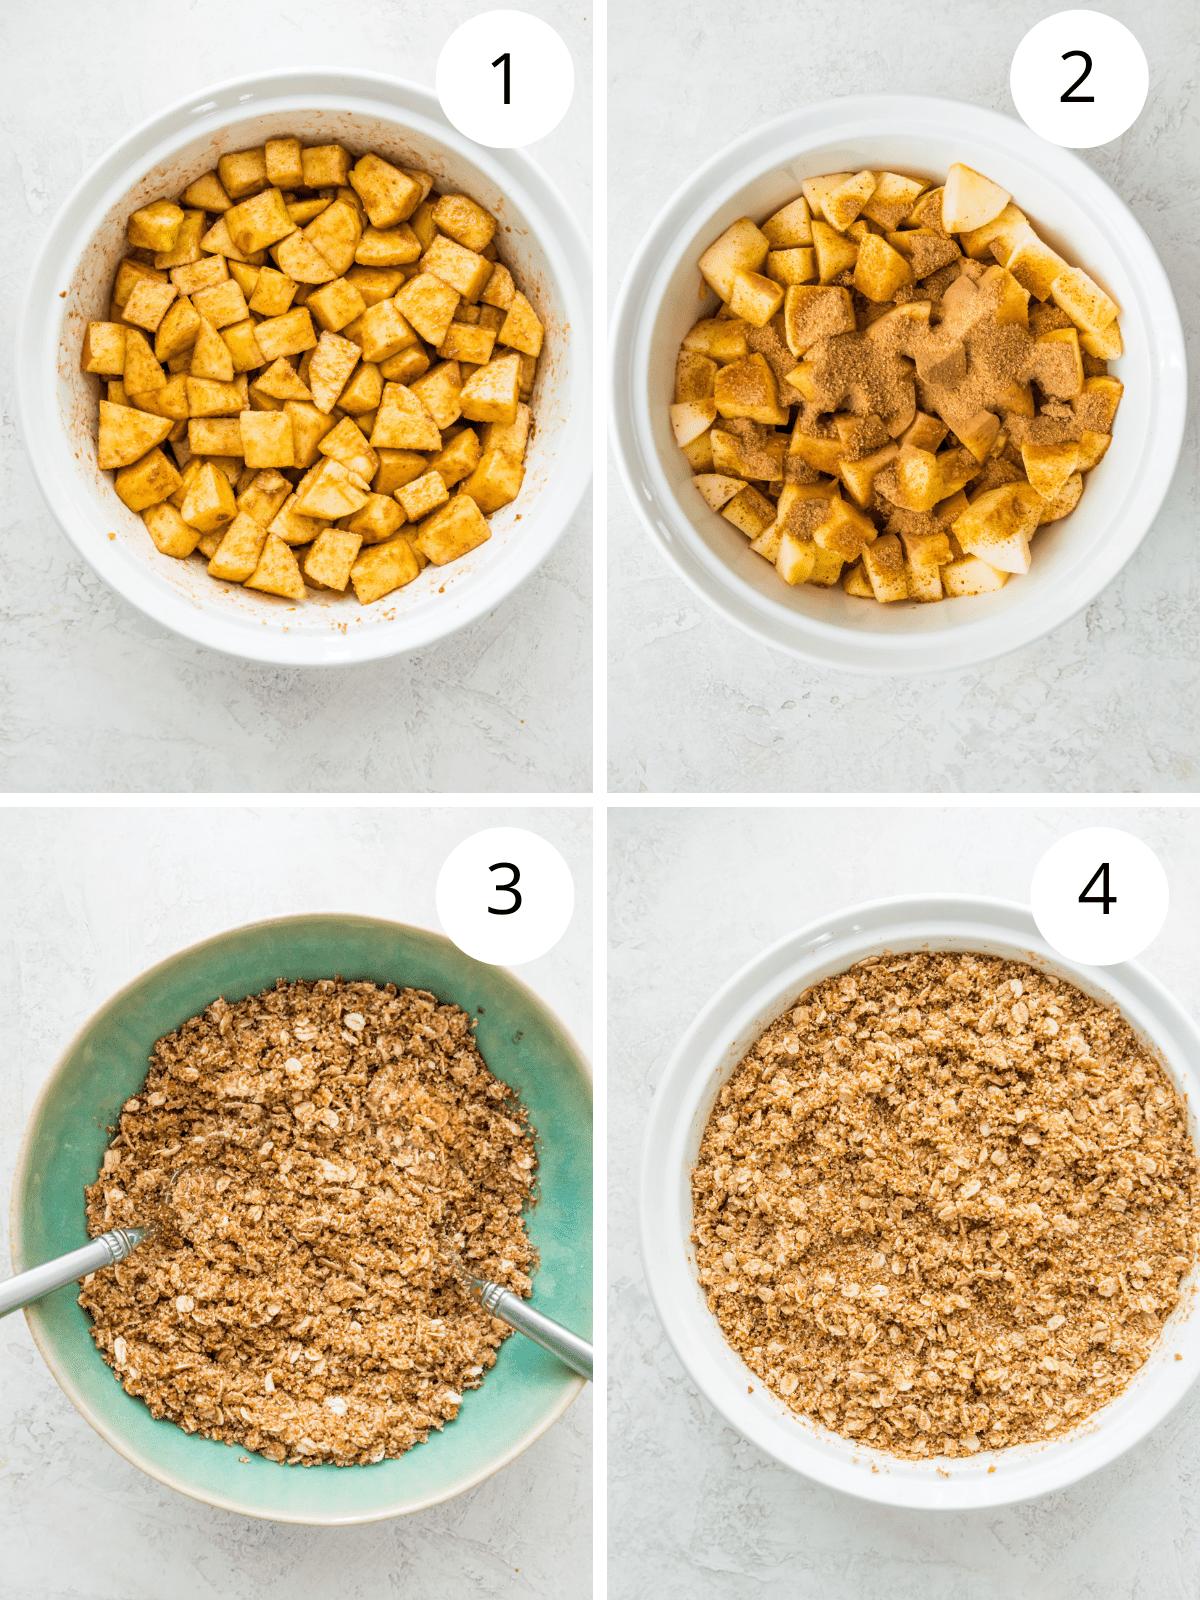 Step by step directions for making apple crumble in a casserole dish.